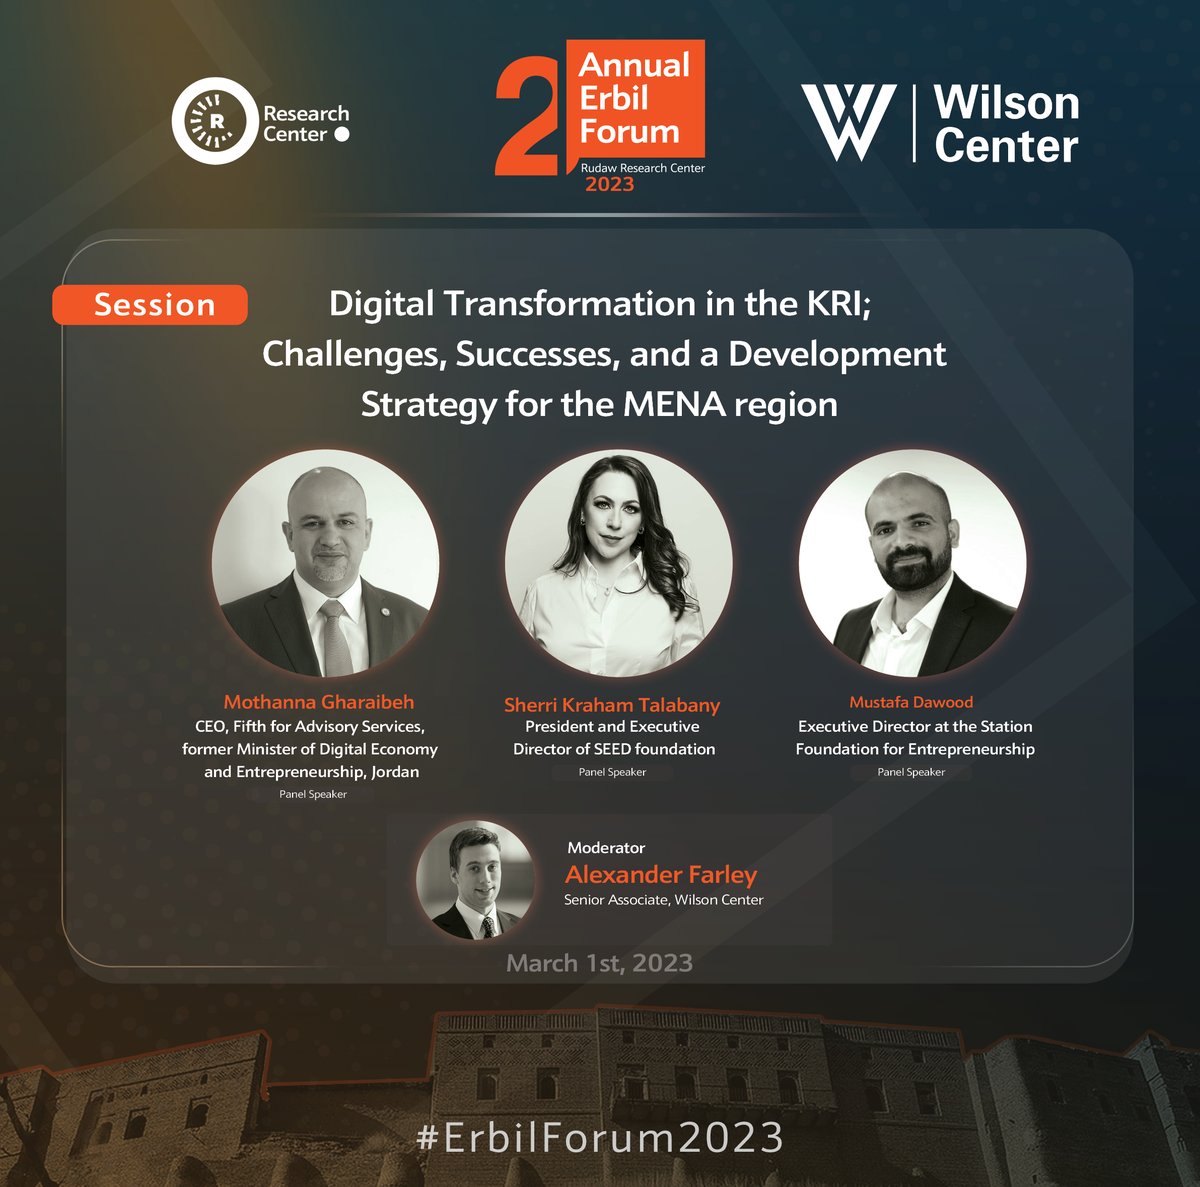 The second panel of the Erbil Forum - "Digital Transformation in the KRI; Challenges, Successes, and a Development Strategy for the MENA region" - is about to commence.
#ErbilForum2023 